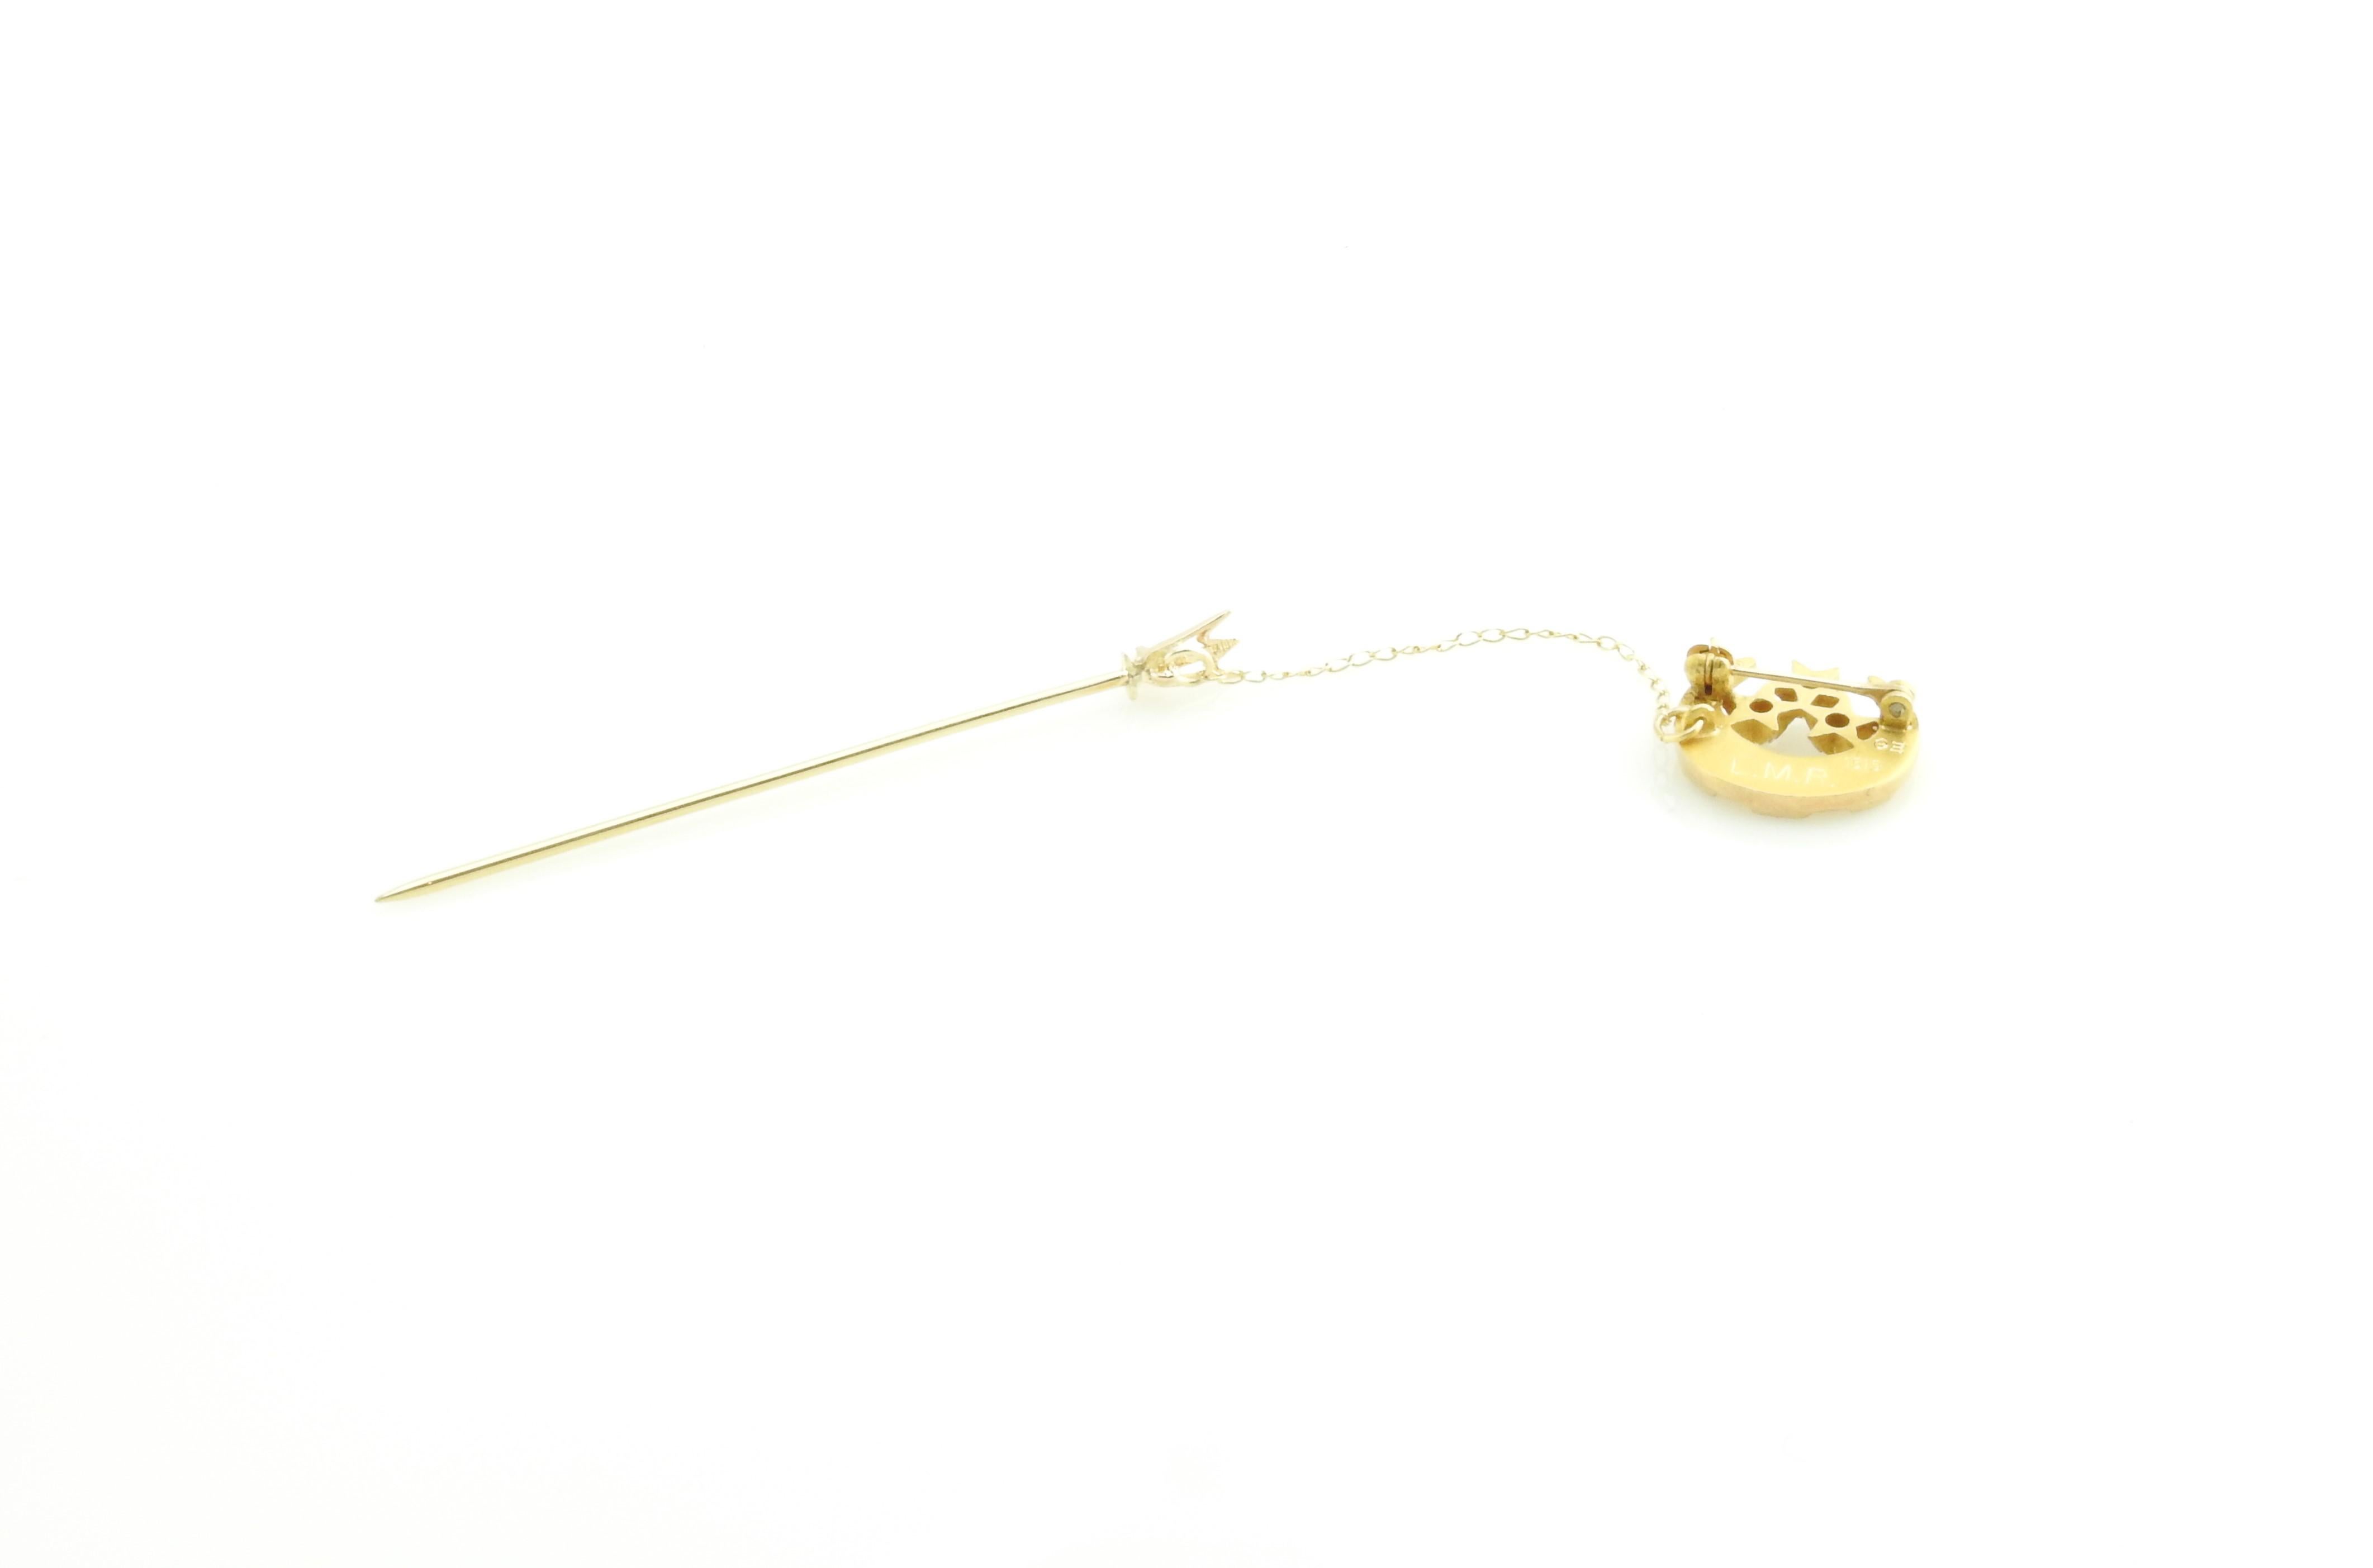 Round Cut 10 Karat Yellow Gold and Seed Pearl Crescent Moon Stick Pin